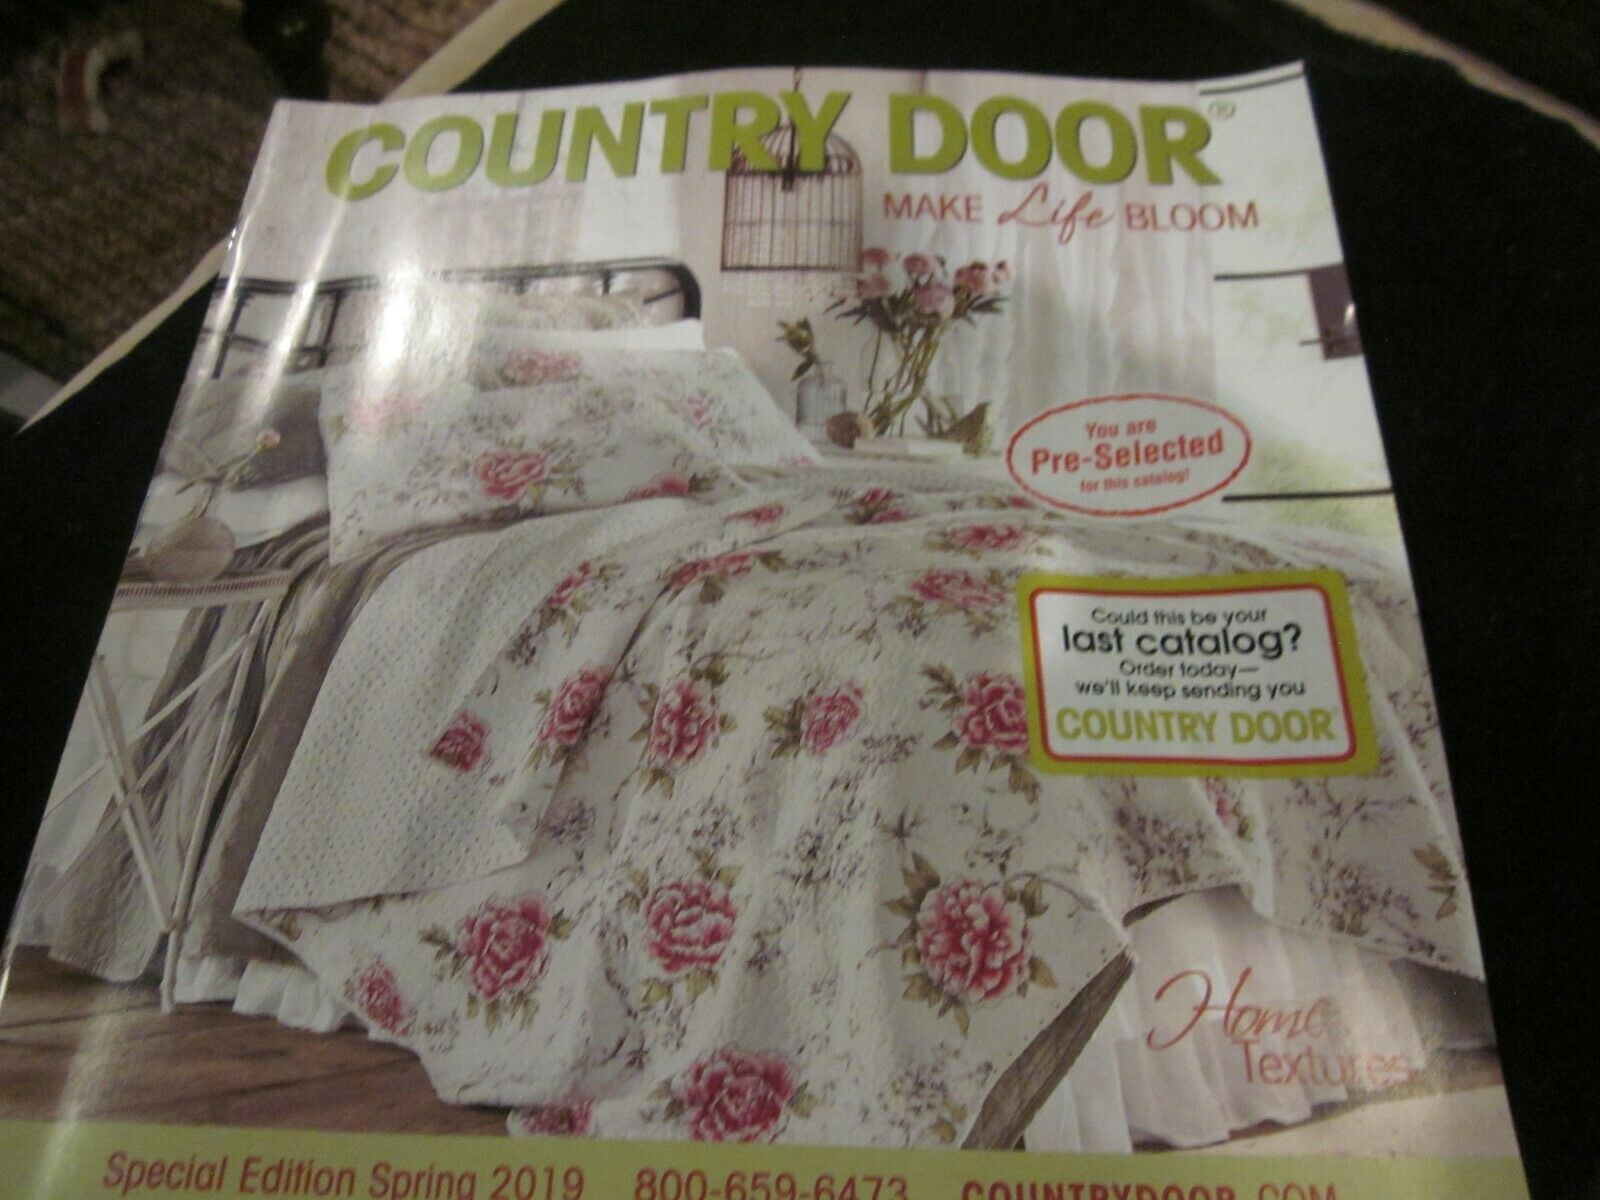 COUNTRY DOOR CATALOG SPECIAL EDITION SPRING 2019 MAKE LIFE BLOOM BRAND